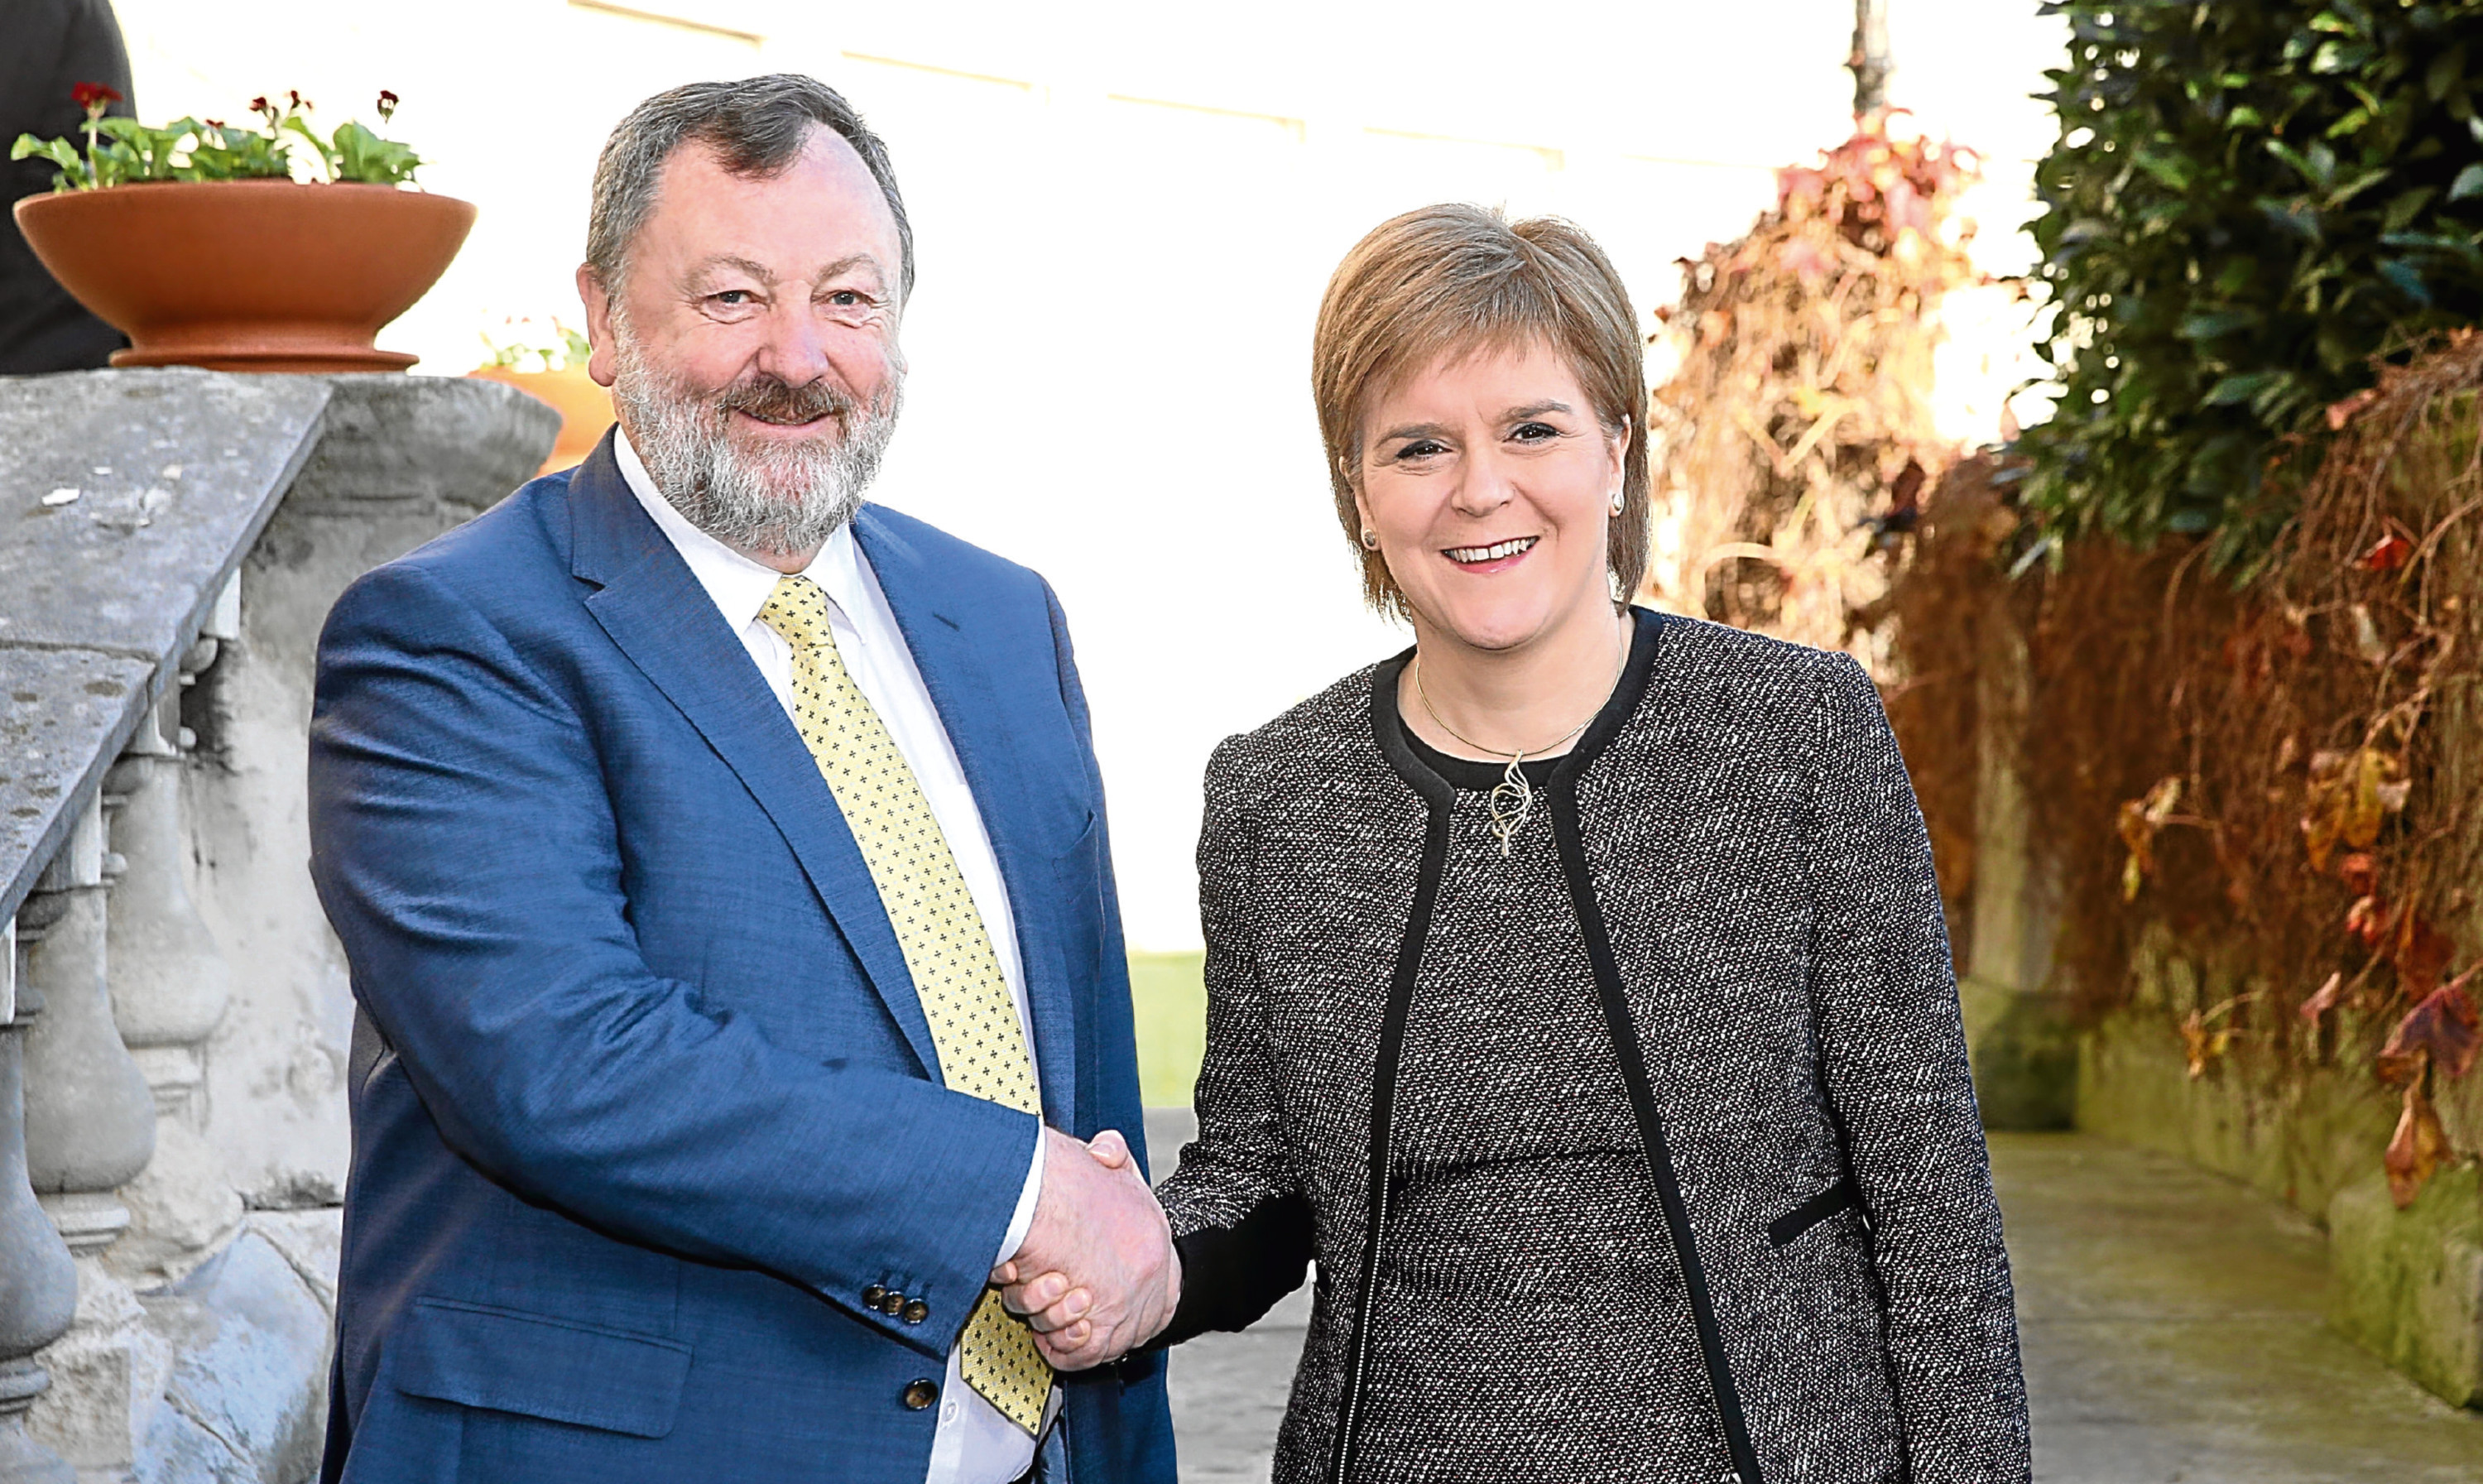 Irish politician Denis ODonovan greets First Minister Nicola Sturgeon at Leinster House, Dublin, where she was due to address the Seanad as part of her two-day visit to Ireland.